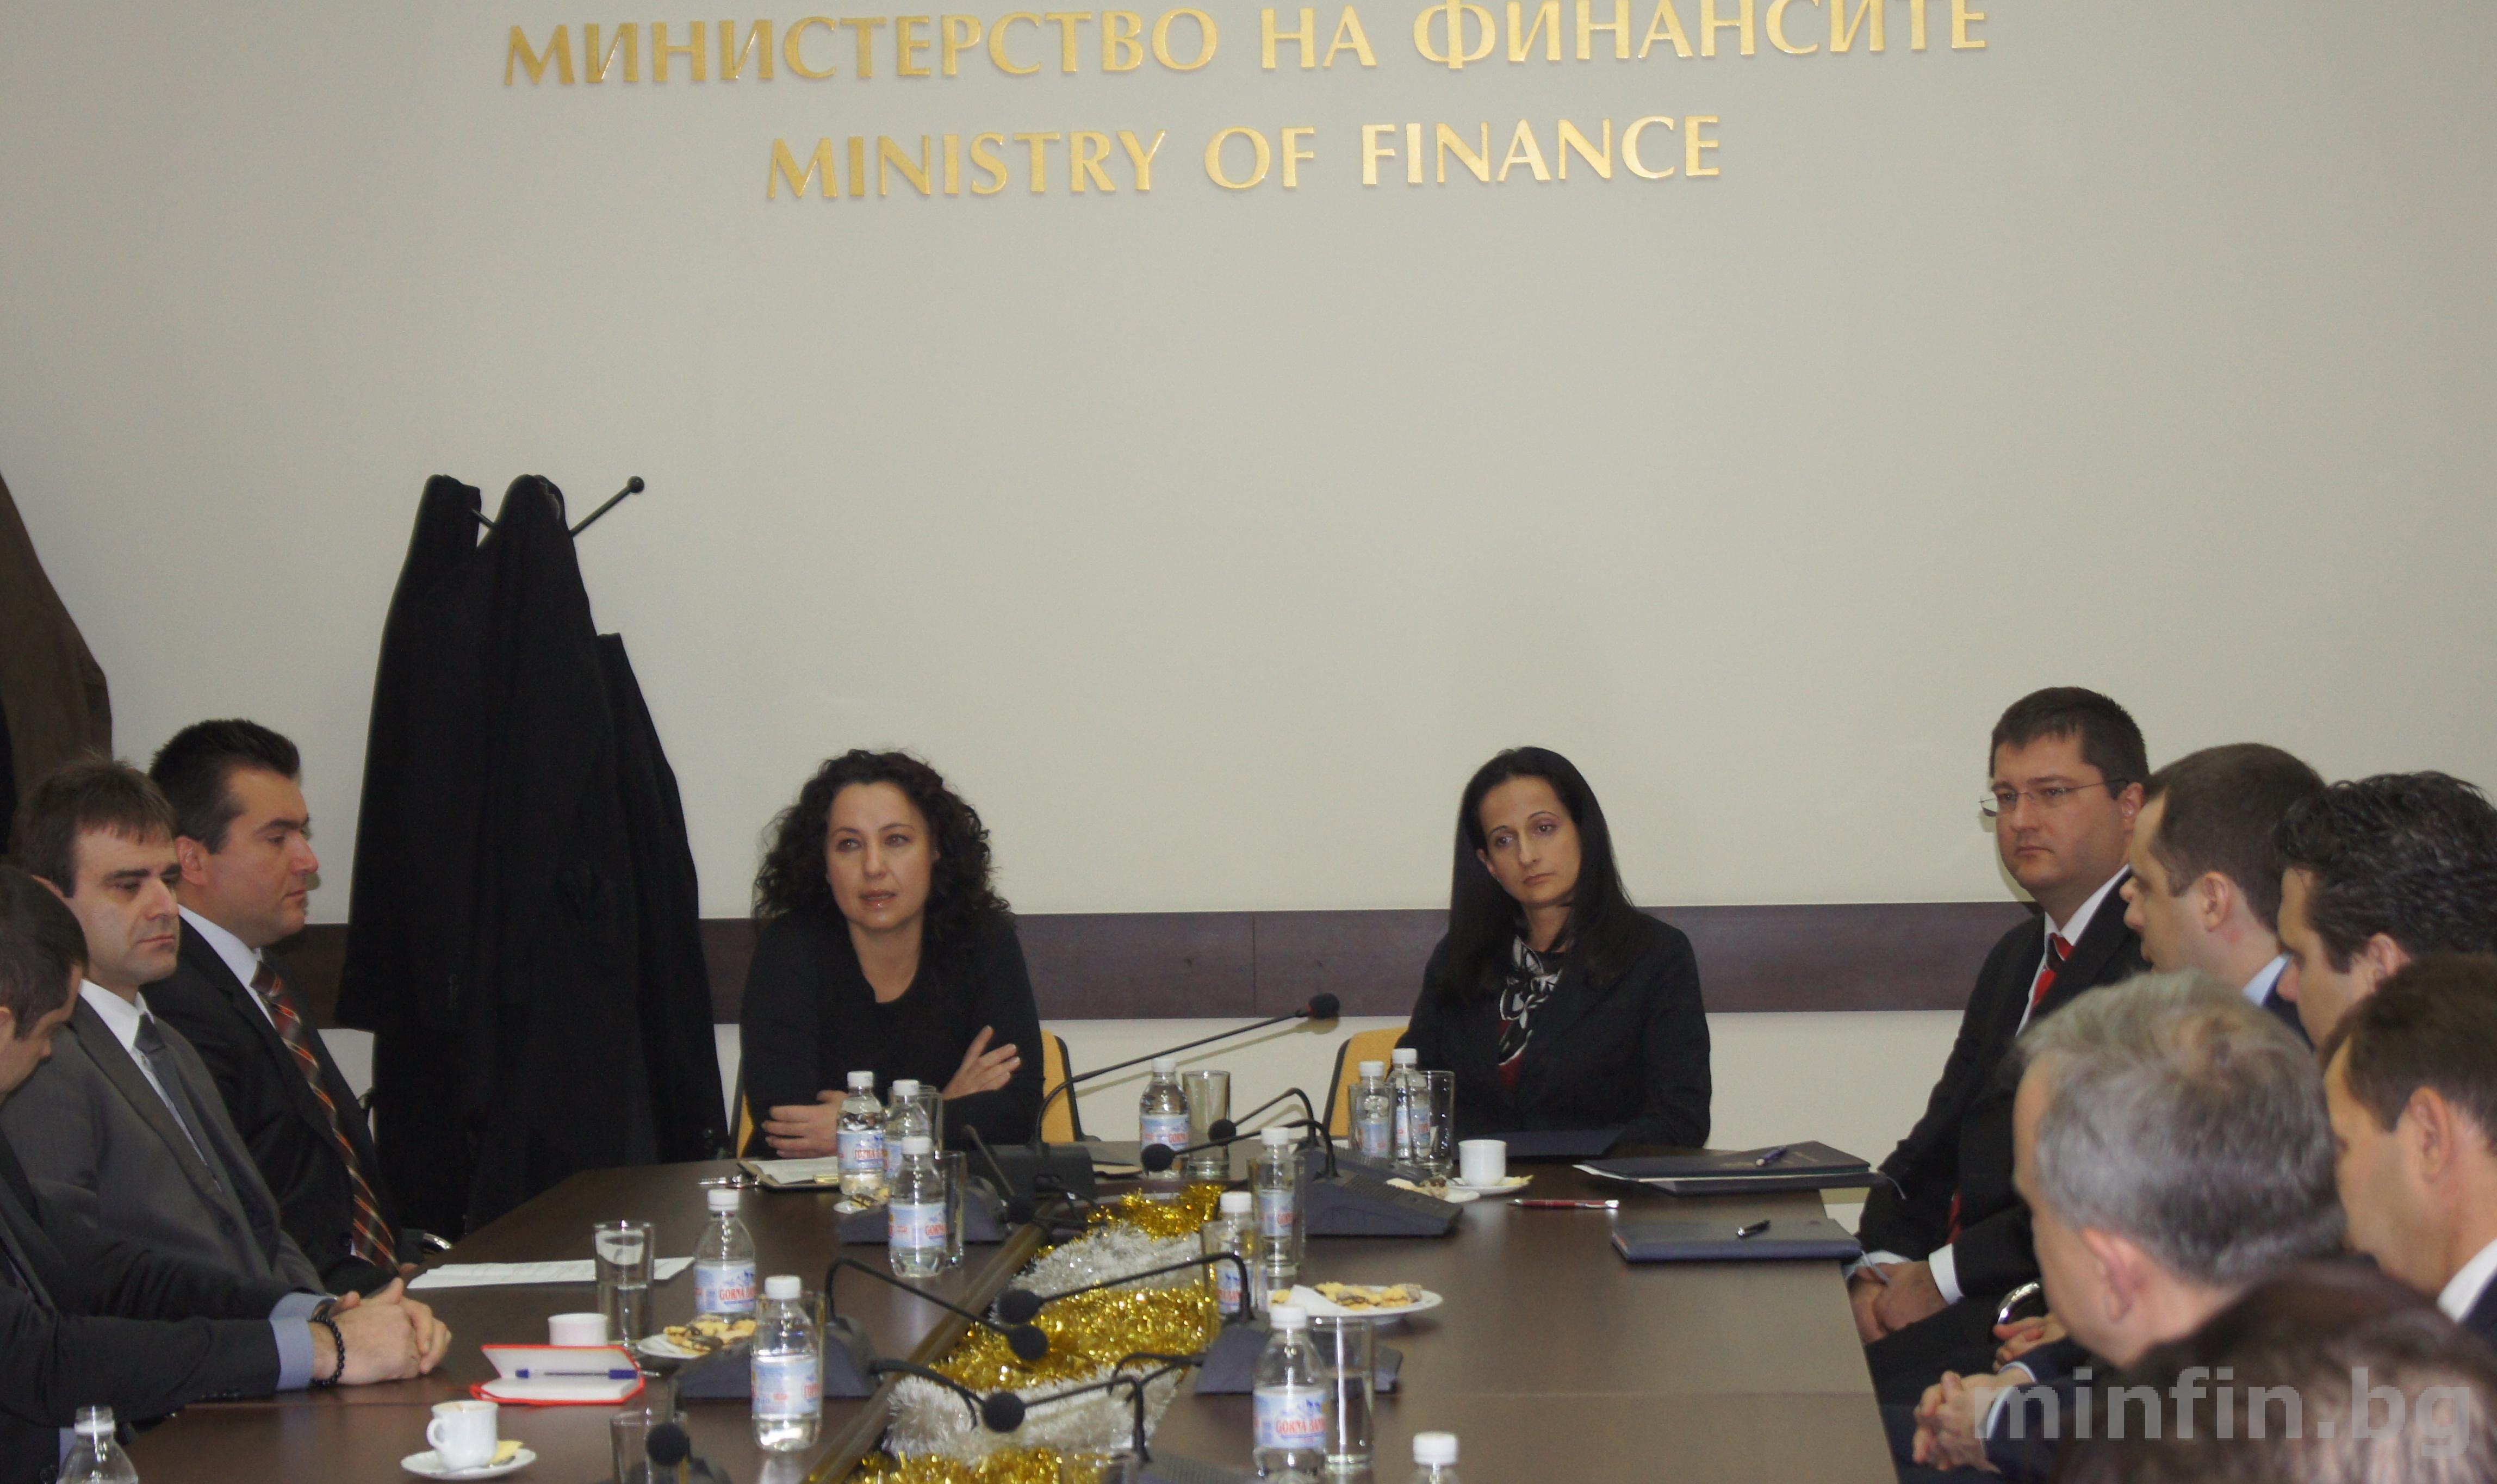 DEPUTY MINISTER OF FINANCE KARINA KARAIVANOVA ANNOUNCED THE MOST ACTIVE PARTICIPANTS IN THE BULGARIAN GOVERNMENT SECURITIES MARKET IN 2012